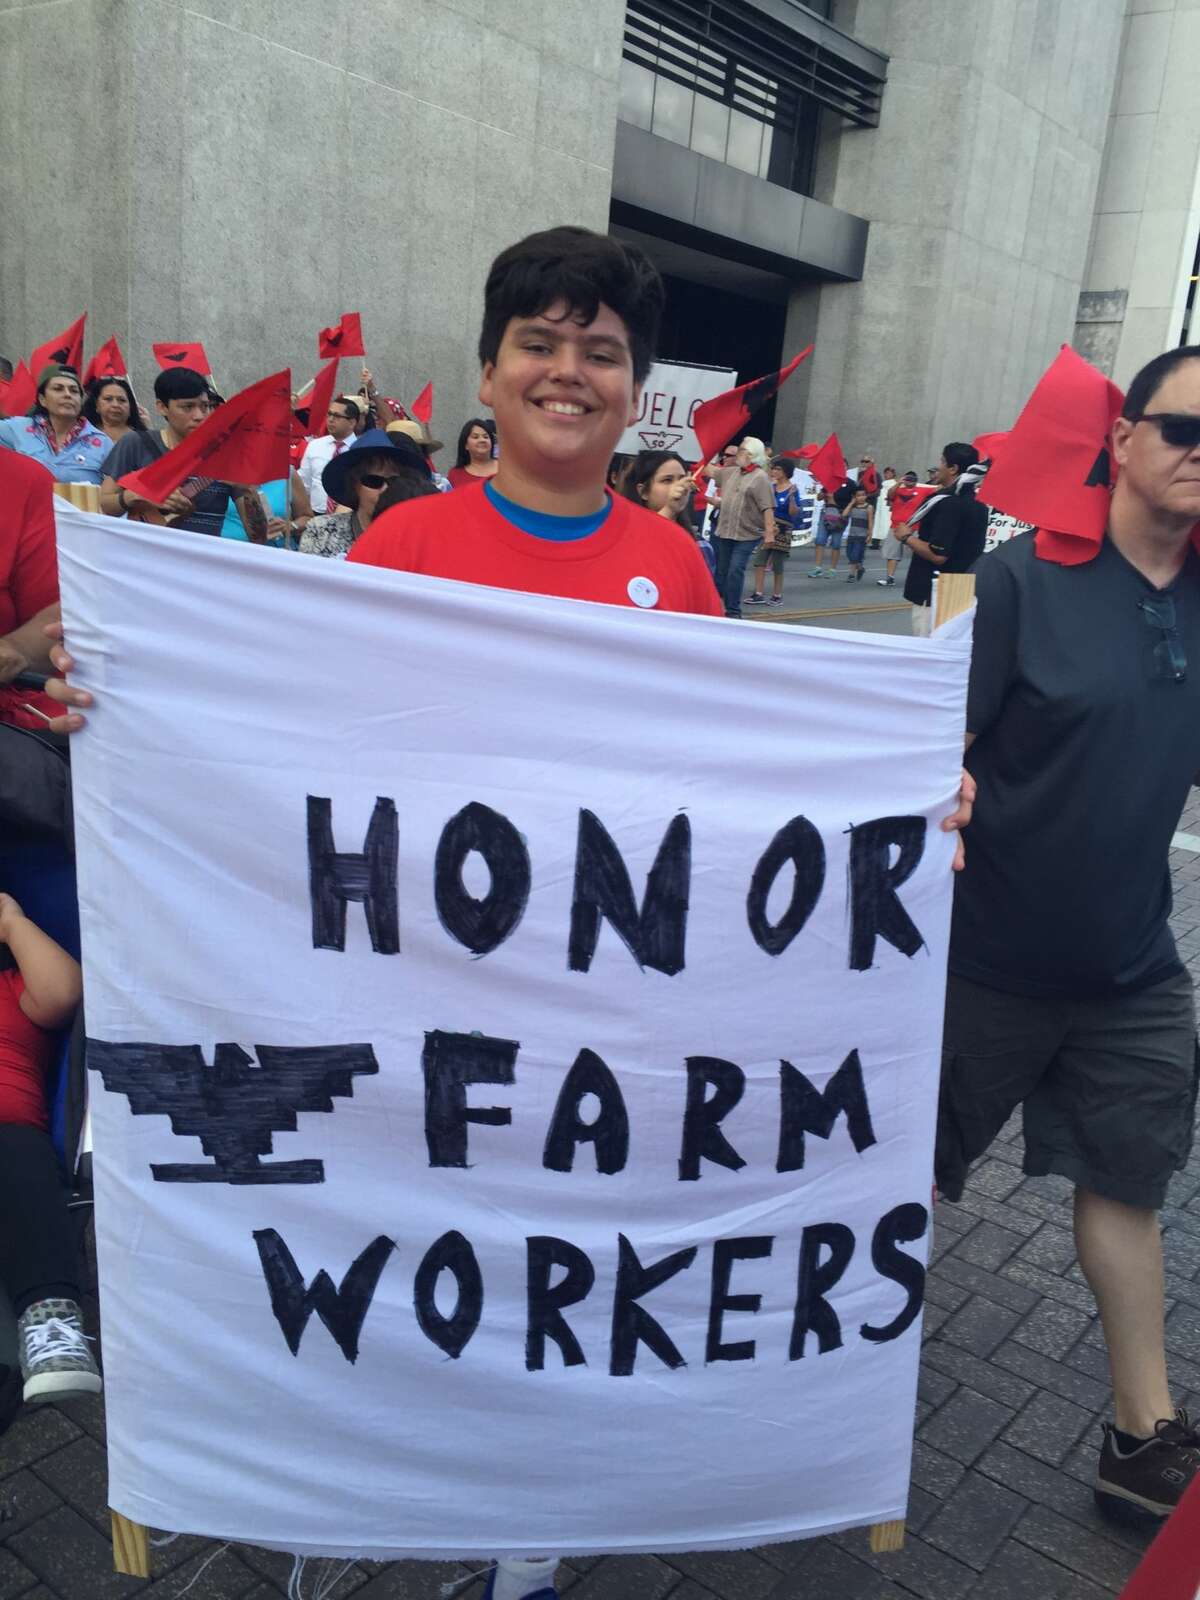 Ramon James Contreras, 13, joined hundreds of people in a march from the San Fernando Cathedral to Milam Park on Monday, Labor Day. The march commemorated the 50th anniversary of the 1966 Starr County strike and march, which started in Rio Grande City and ended in Austin on Labor Day.